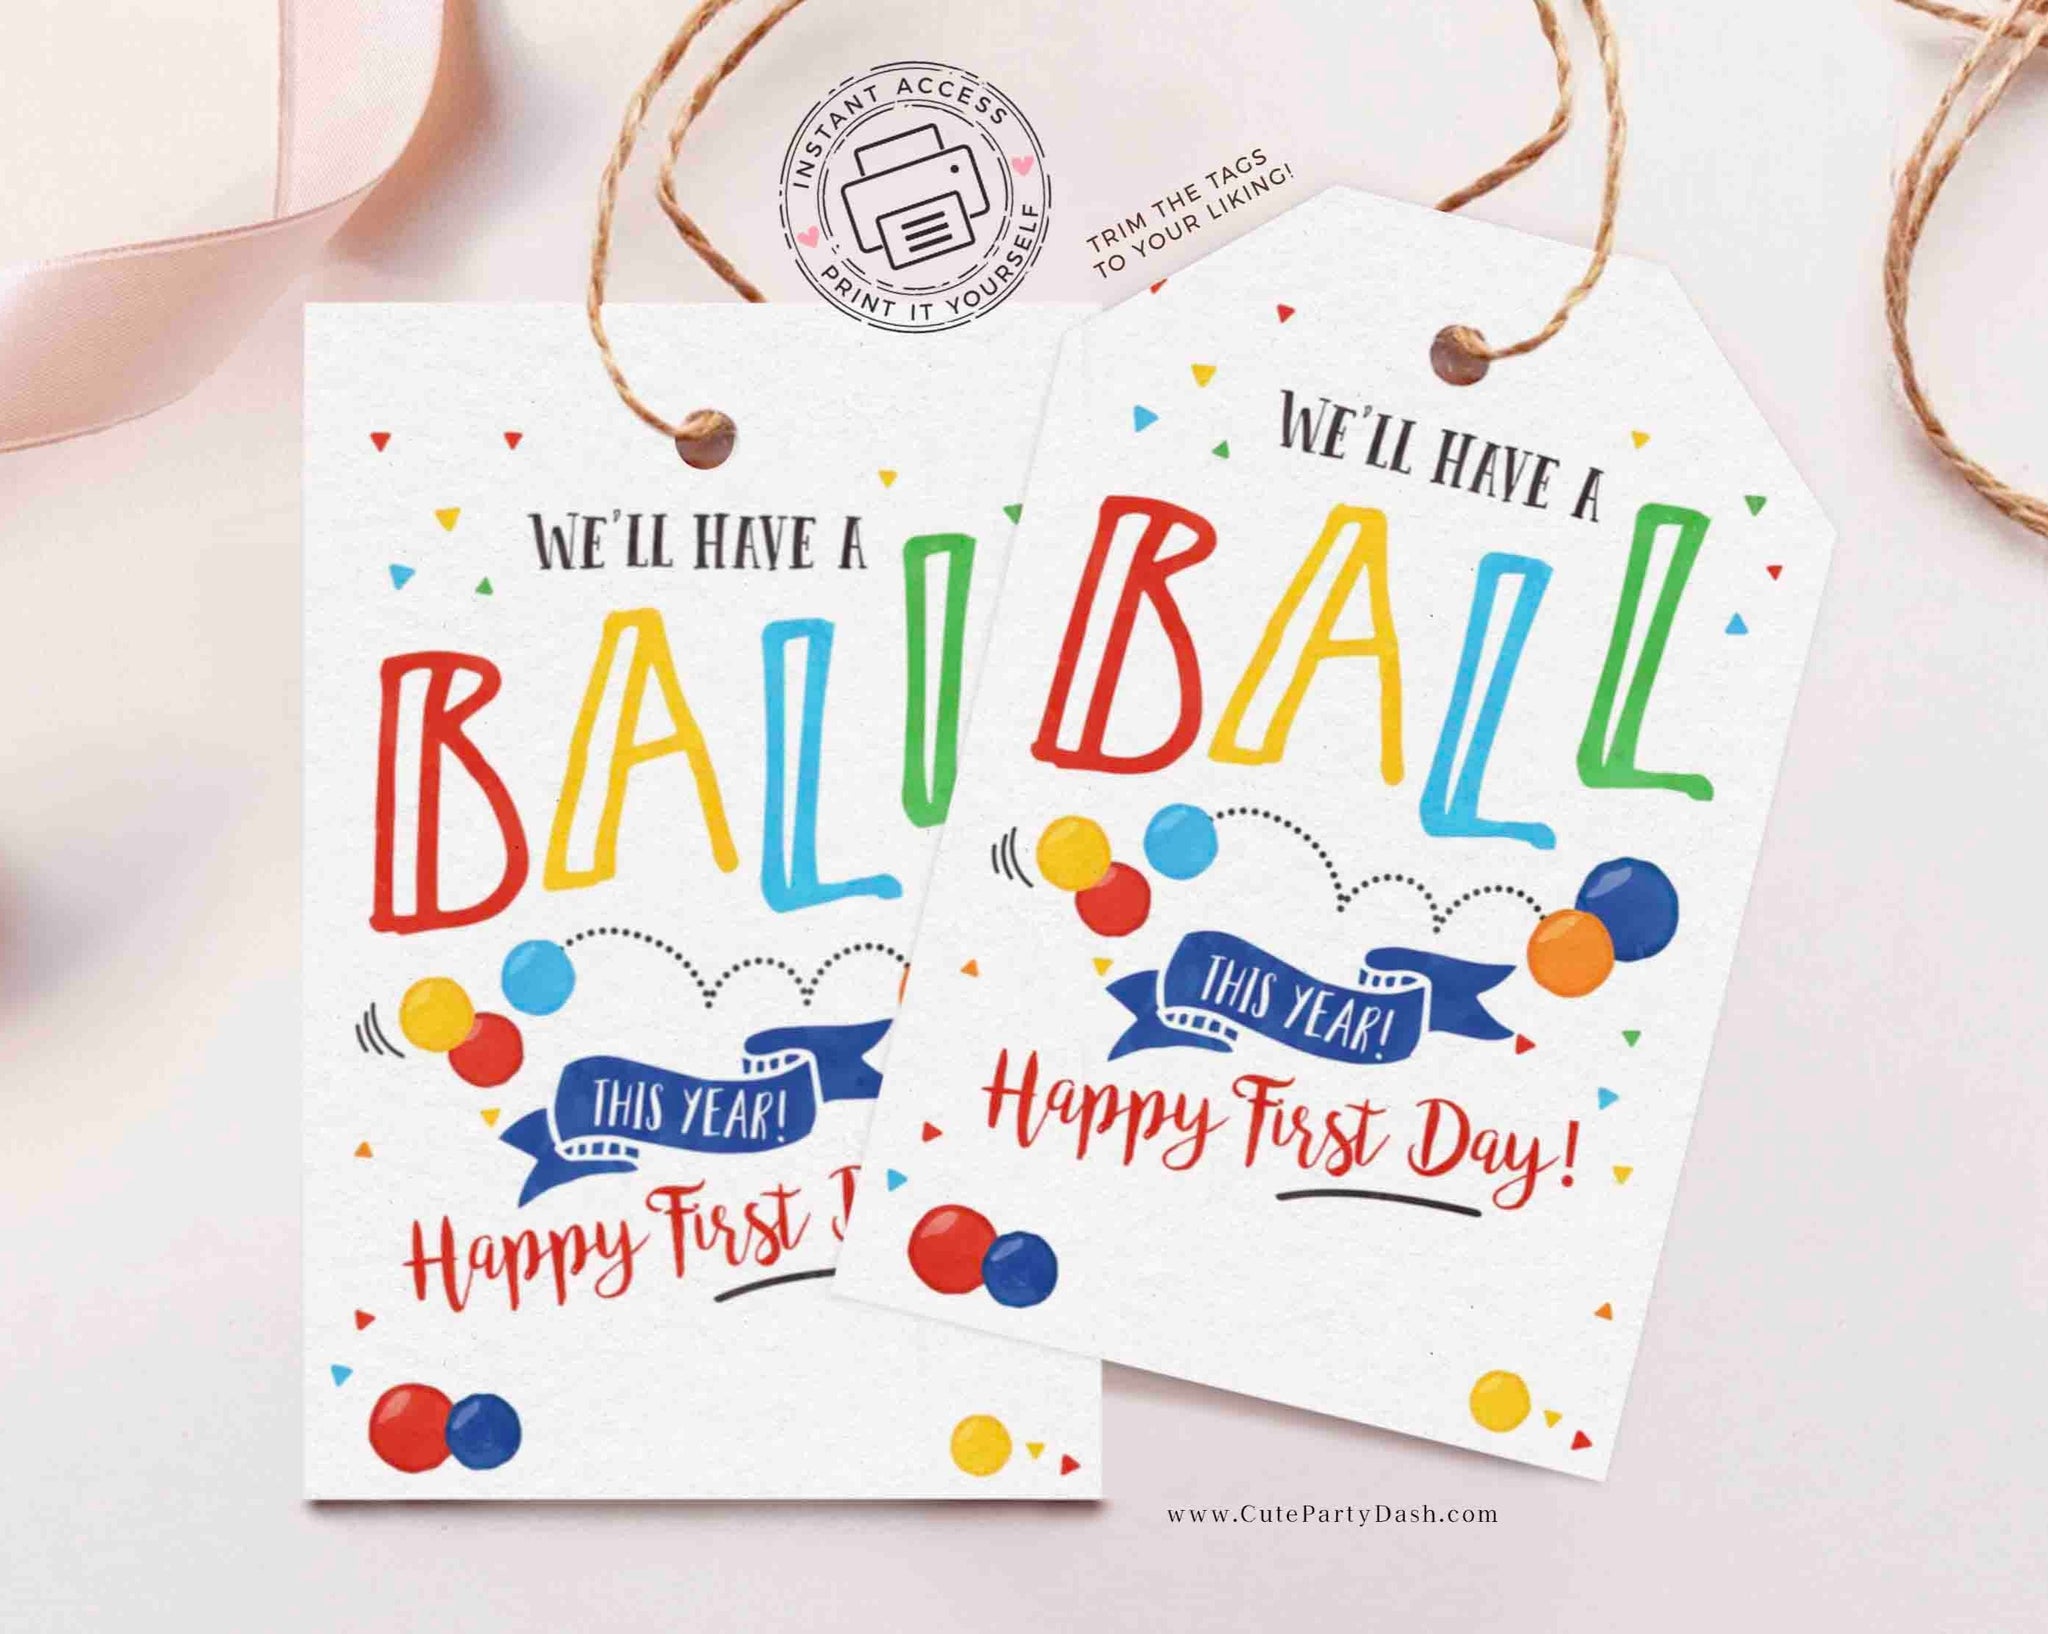 Have a Ball this year tag INSTANT DOWNLOAD Back to School gift student Happy First day of School tag Template Printable Ball gift friends